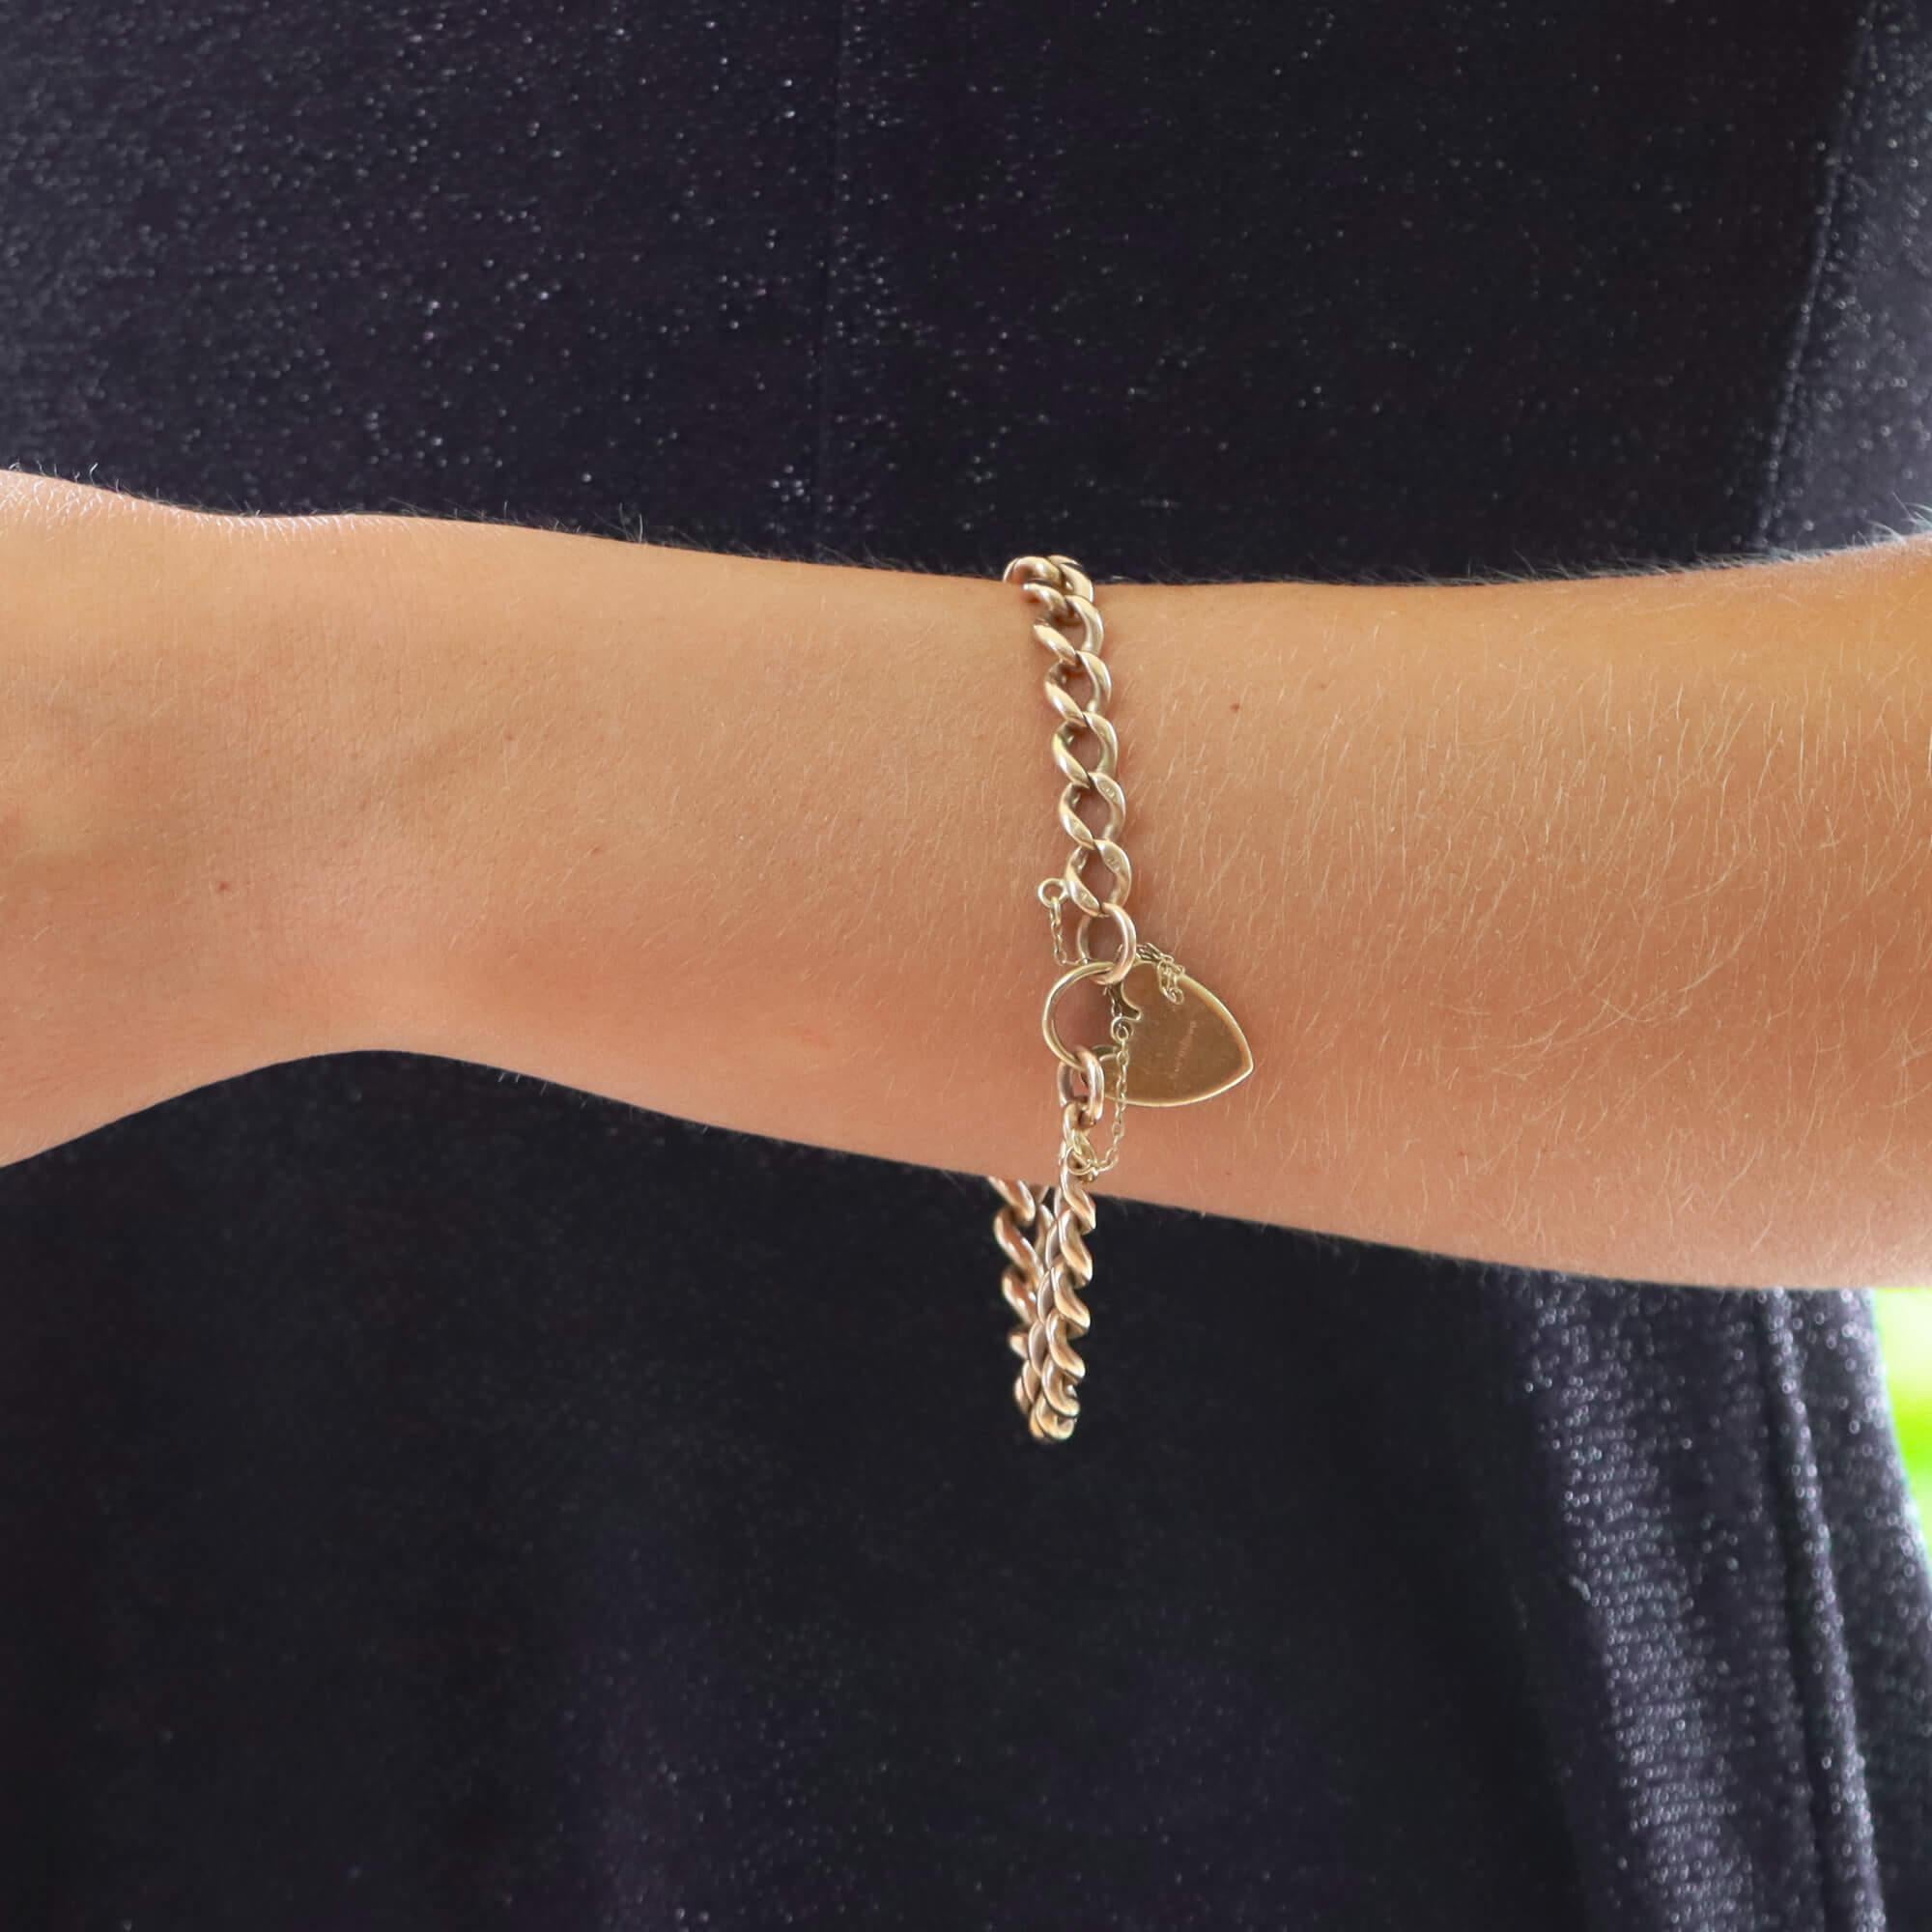 A classic vintage flat curb heart lock charm bracelet in solid 9k rose gold, signed Georg Jensen.

The bracelet is composed of 32 solid 9k rose gold links. The chain bracelet is fastened with a vintage padlock heart clasp which has been hand